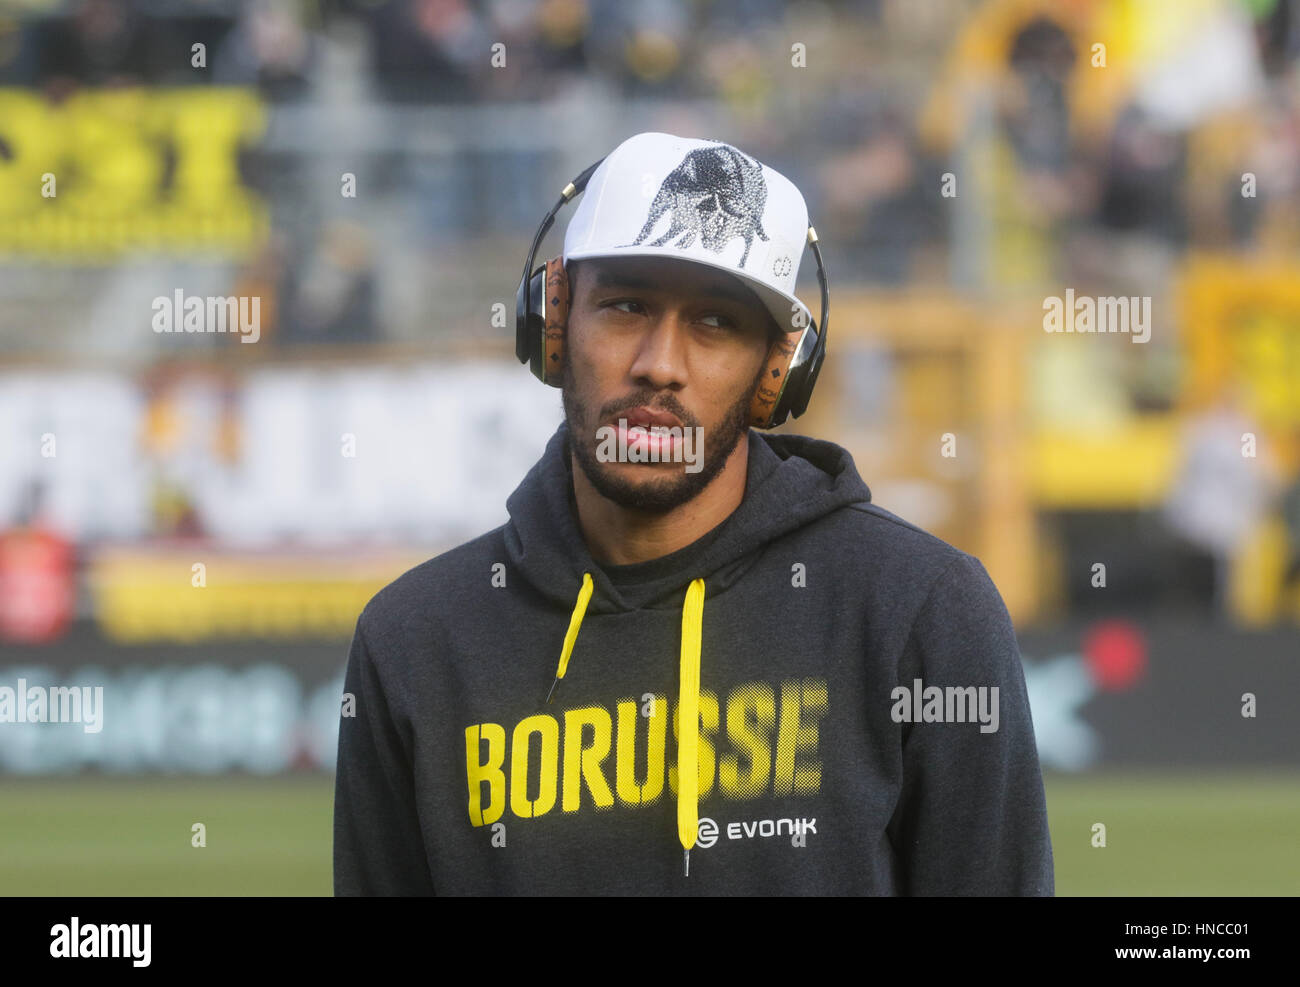 Darmstadt, Germany. 11th Feb, 2017. Dortmund's Pierre-Emerick Aubameyang on the ground before the match at the German Bundesliga soccer match between Darmstadt 98 and Borussia Dortmund at the Jonathan Heimes stadium in Darmstadt, Germany, 11 February 2017. Darmstadt won the game 2:1. Photo: Frank Rumpenhorst/dpa/Alamy Live News Stock Photo